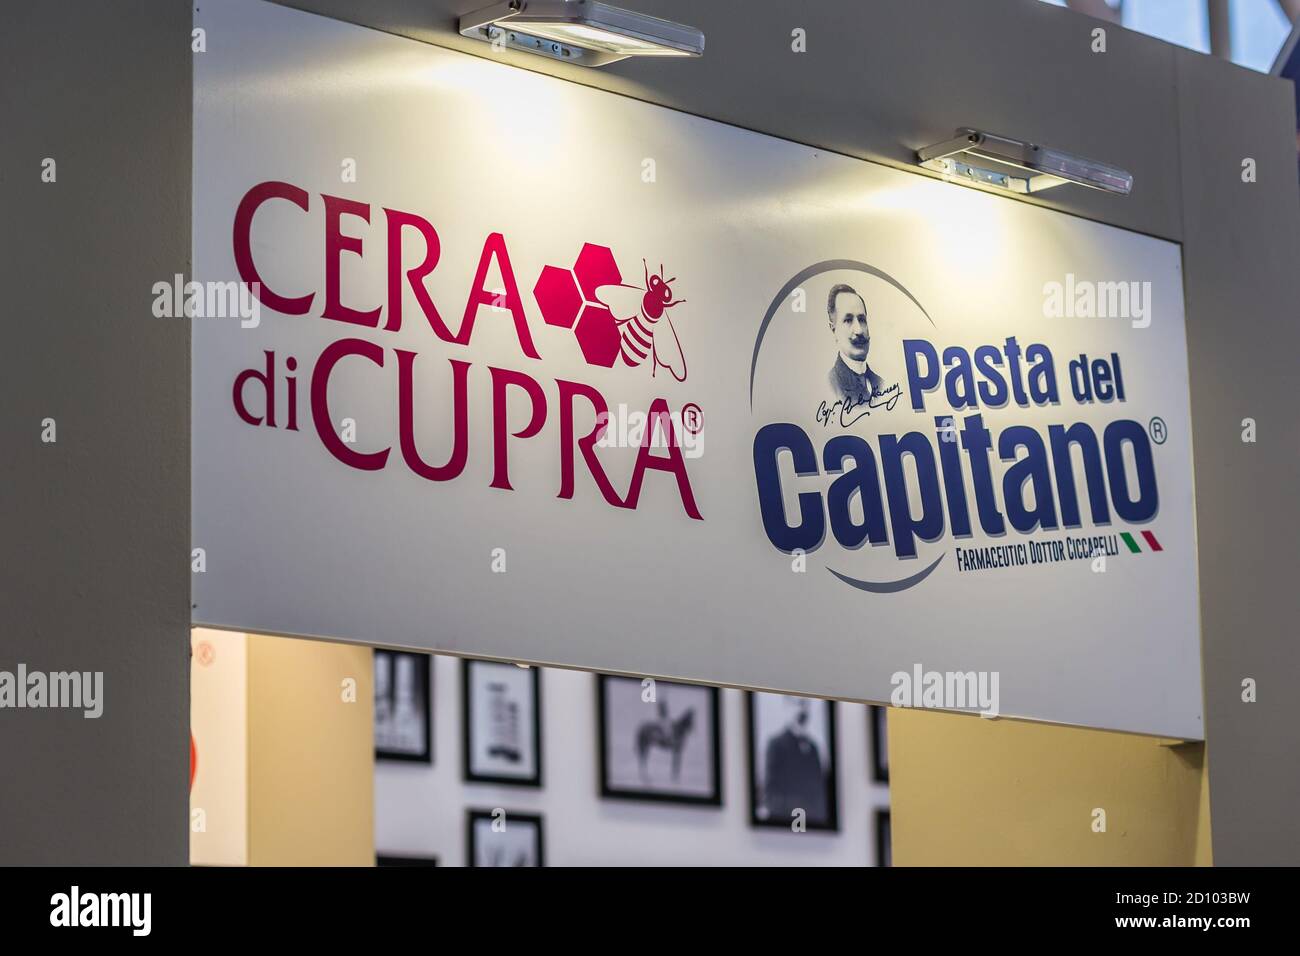 BOLOGNA (BO), ITALY - MARCH 14, 2019: light is enlightening CERA DI CUPRA and PASTA DEL CAPITANO brand logos at COSMOPROF, trade show of the beauty in Stock Photo